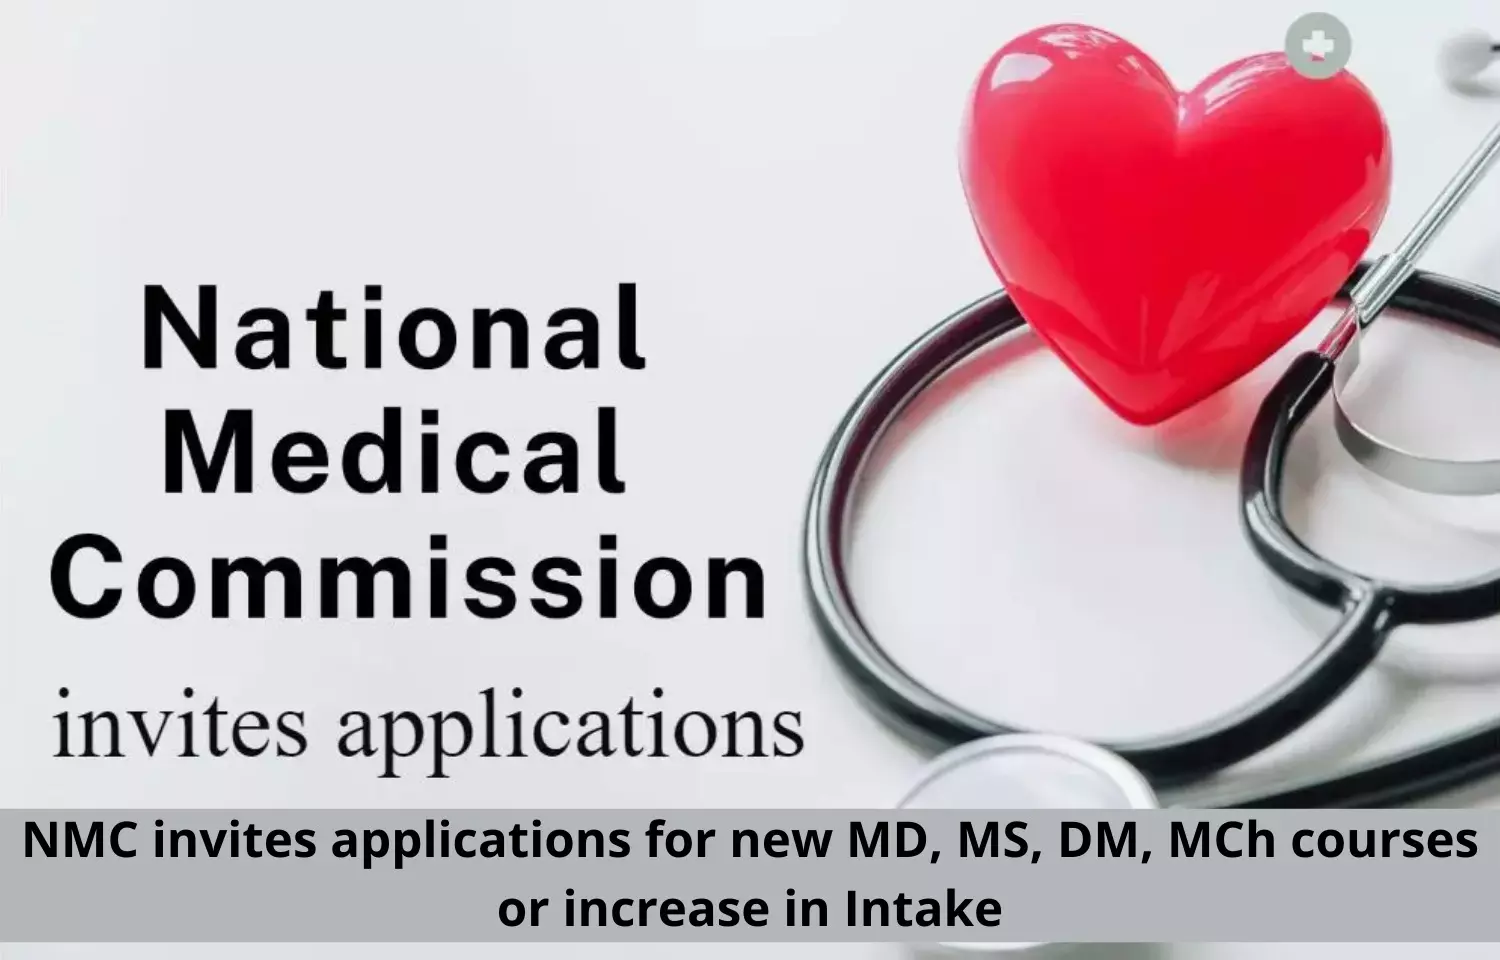 NMC invites applications for new MD, MS, DM, MCh courses or increase in intake